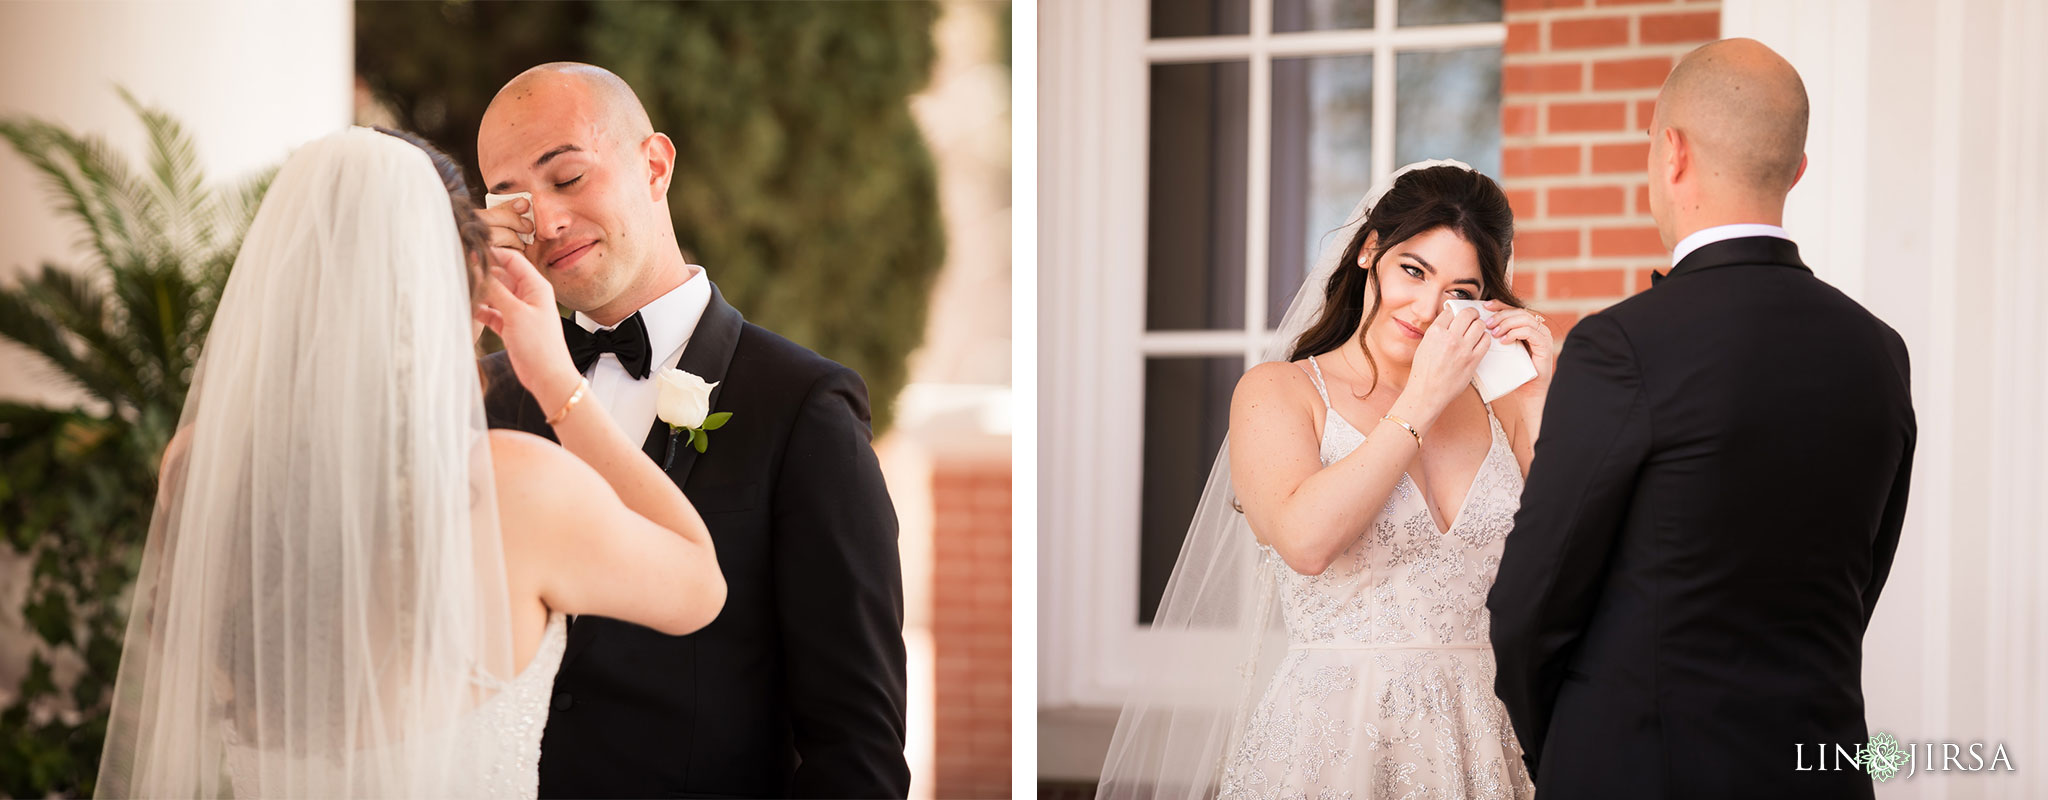 14 sherwood country club ventura county first look wedding photography